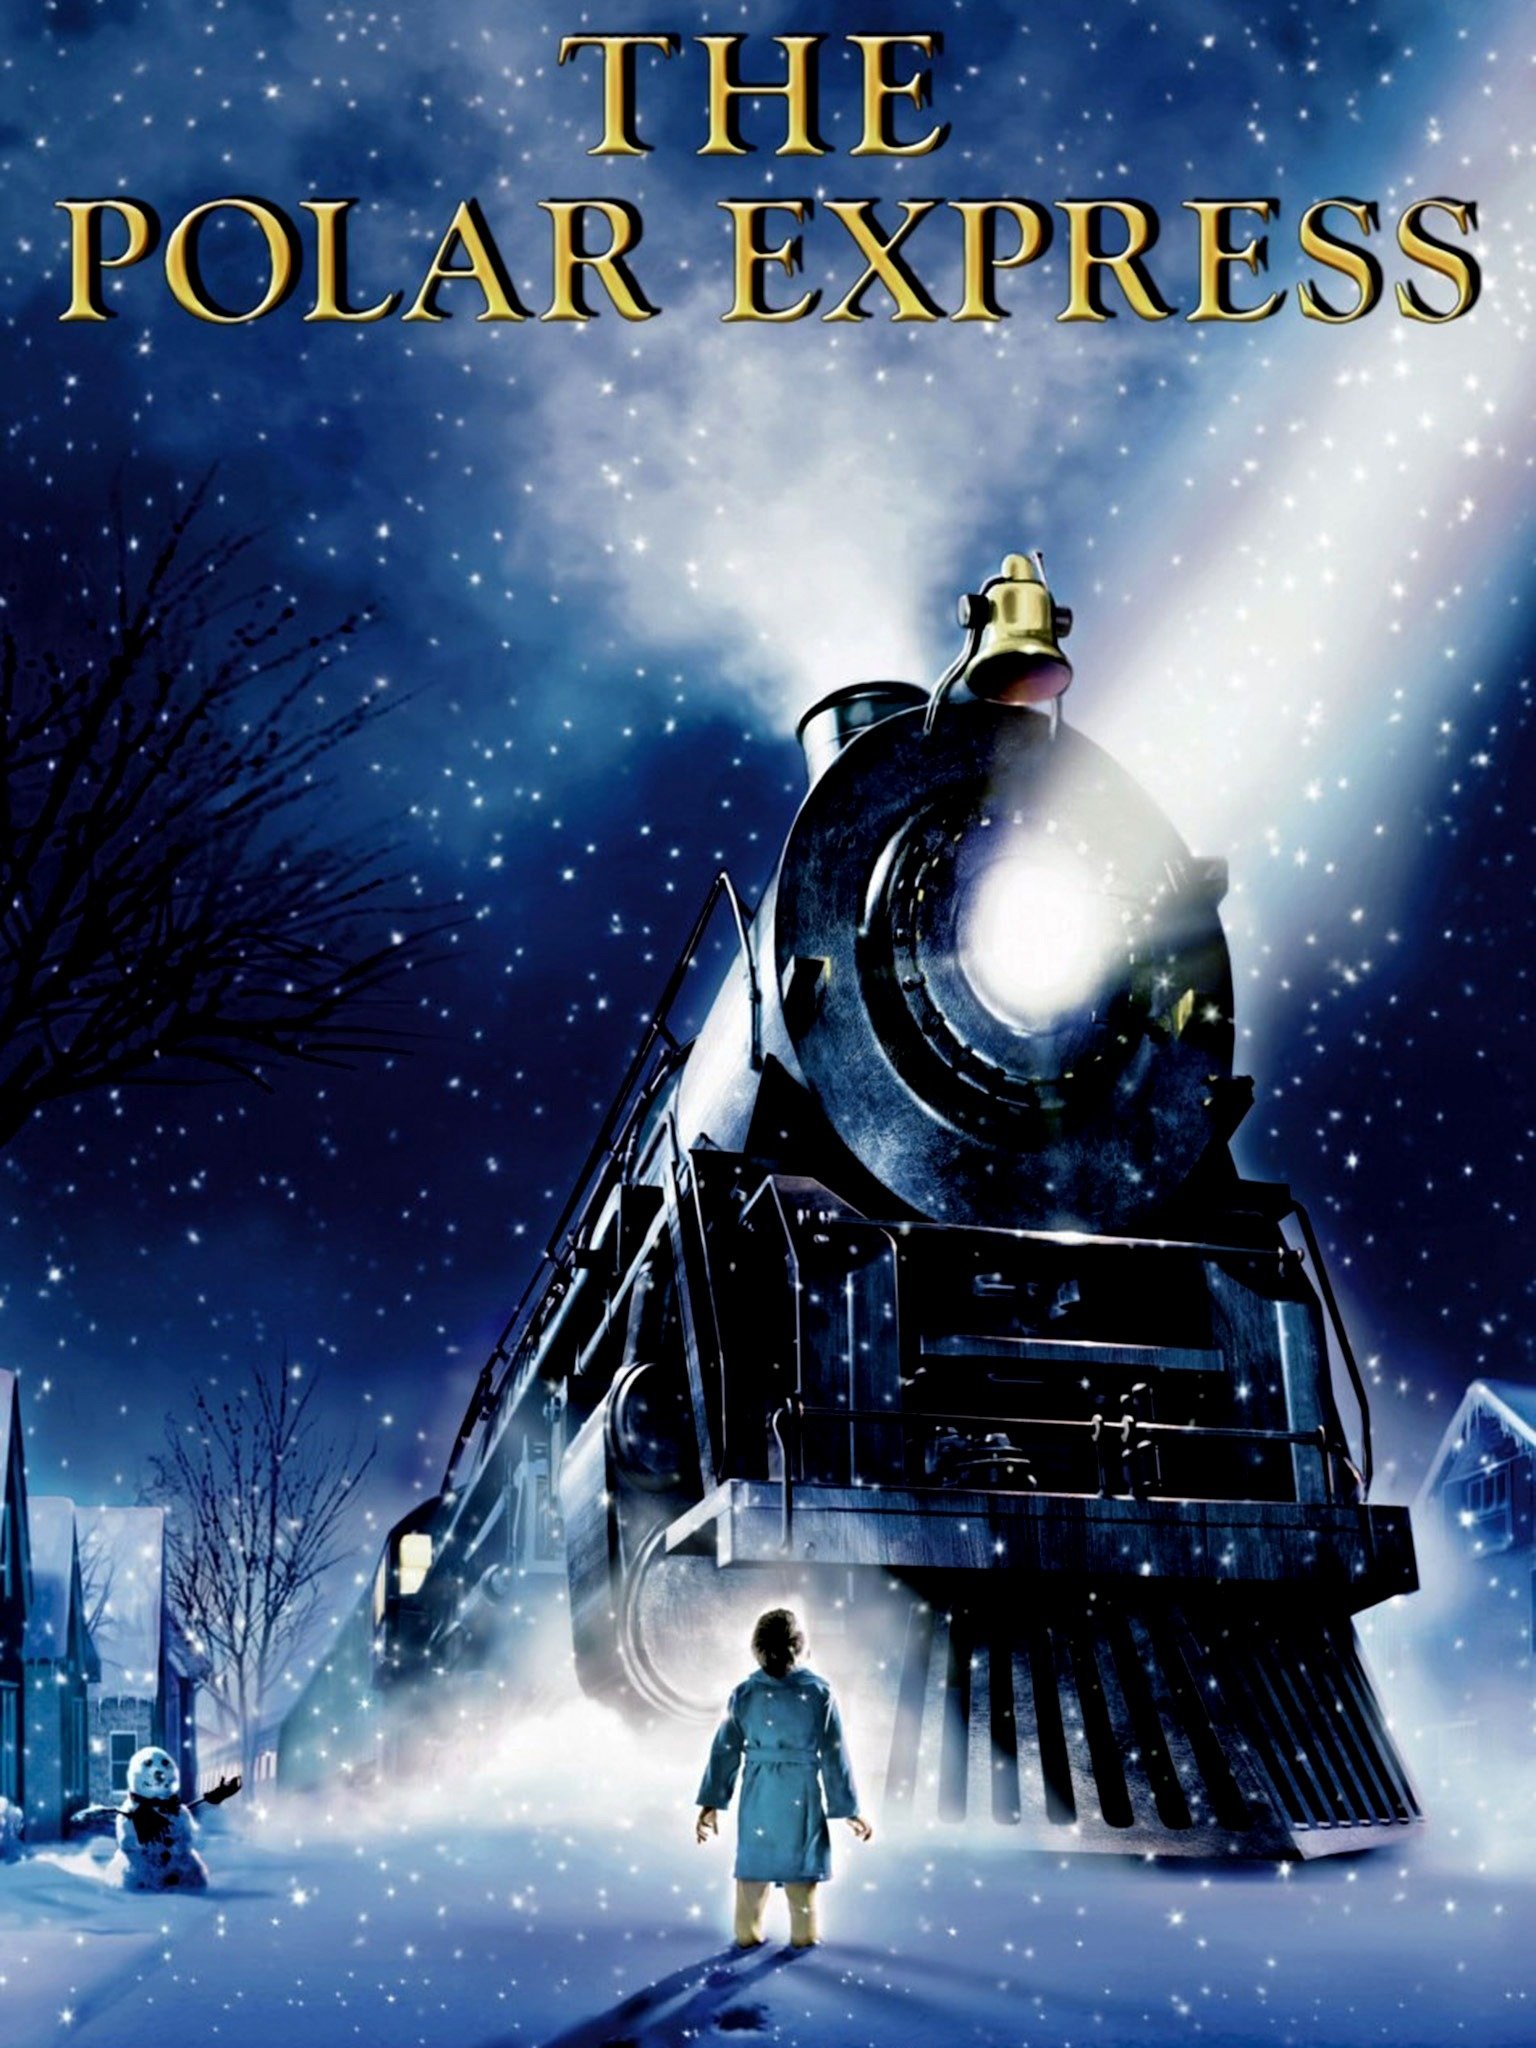 Watch The Polar Express Online with NEON from 5.99